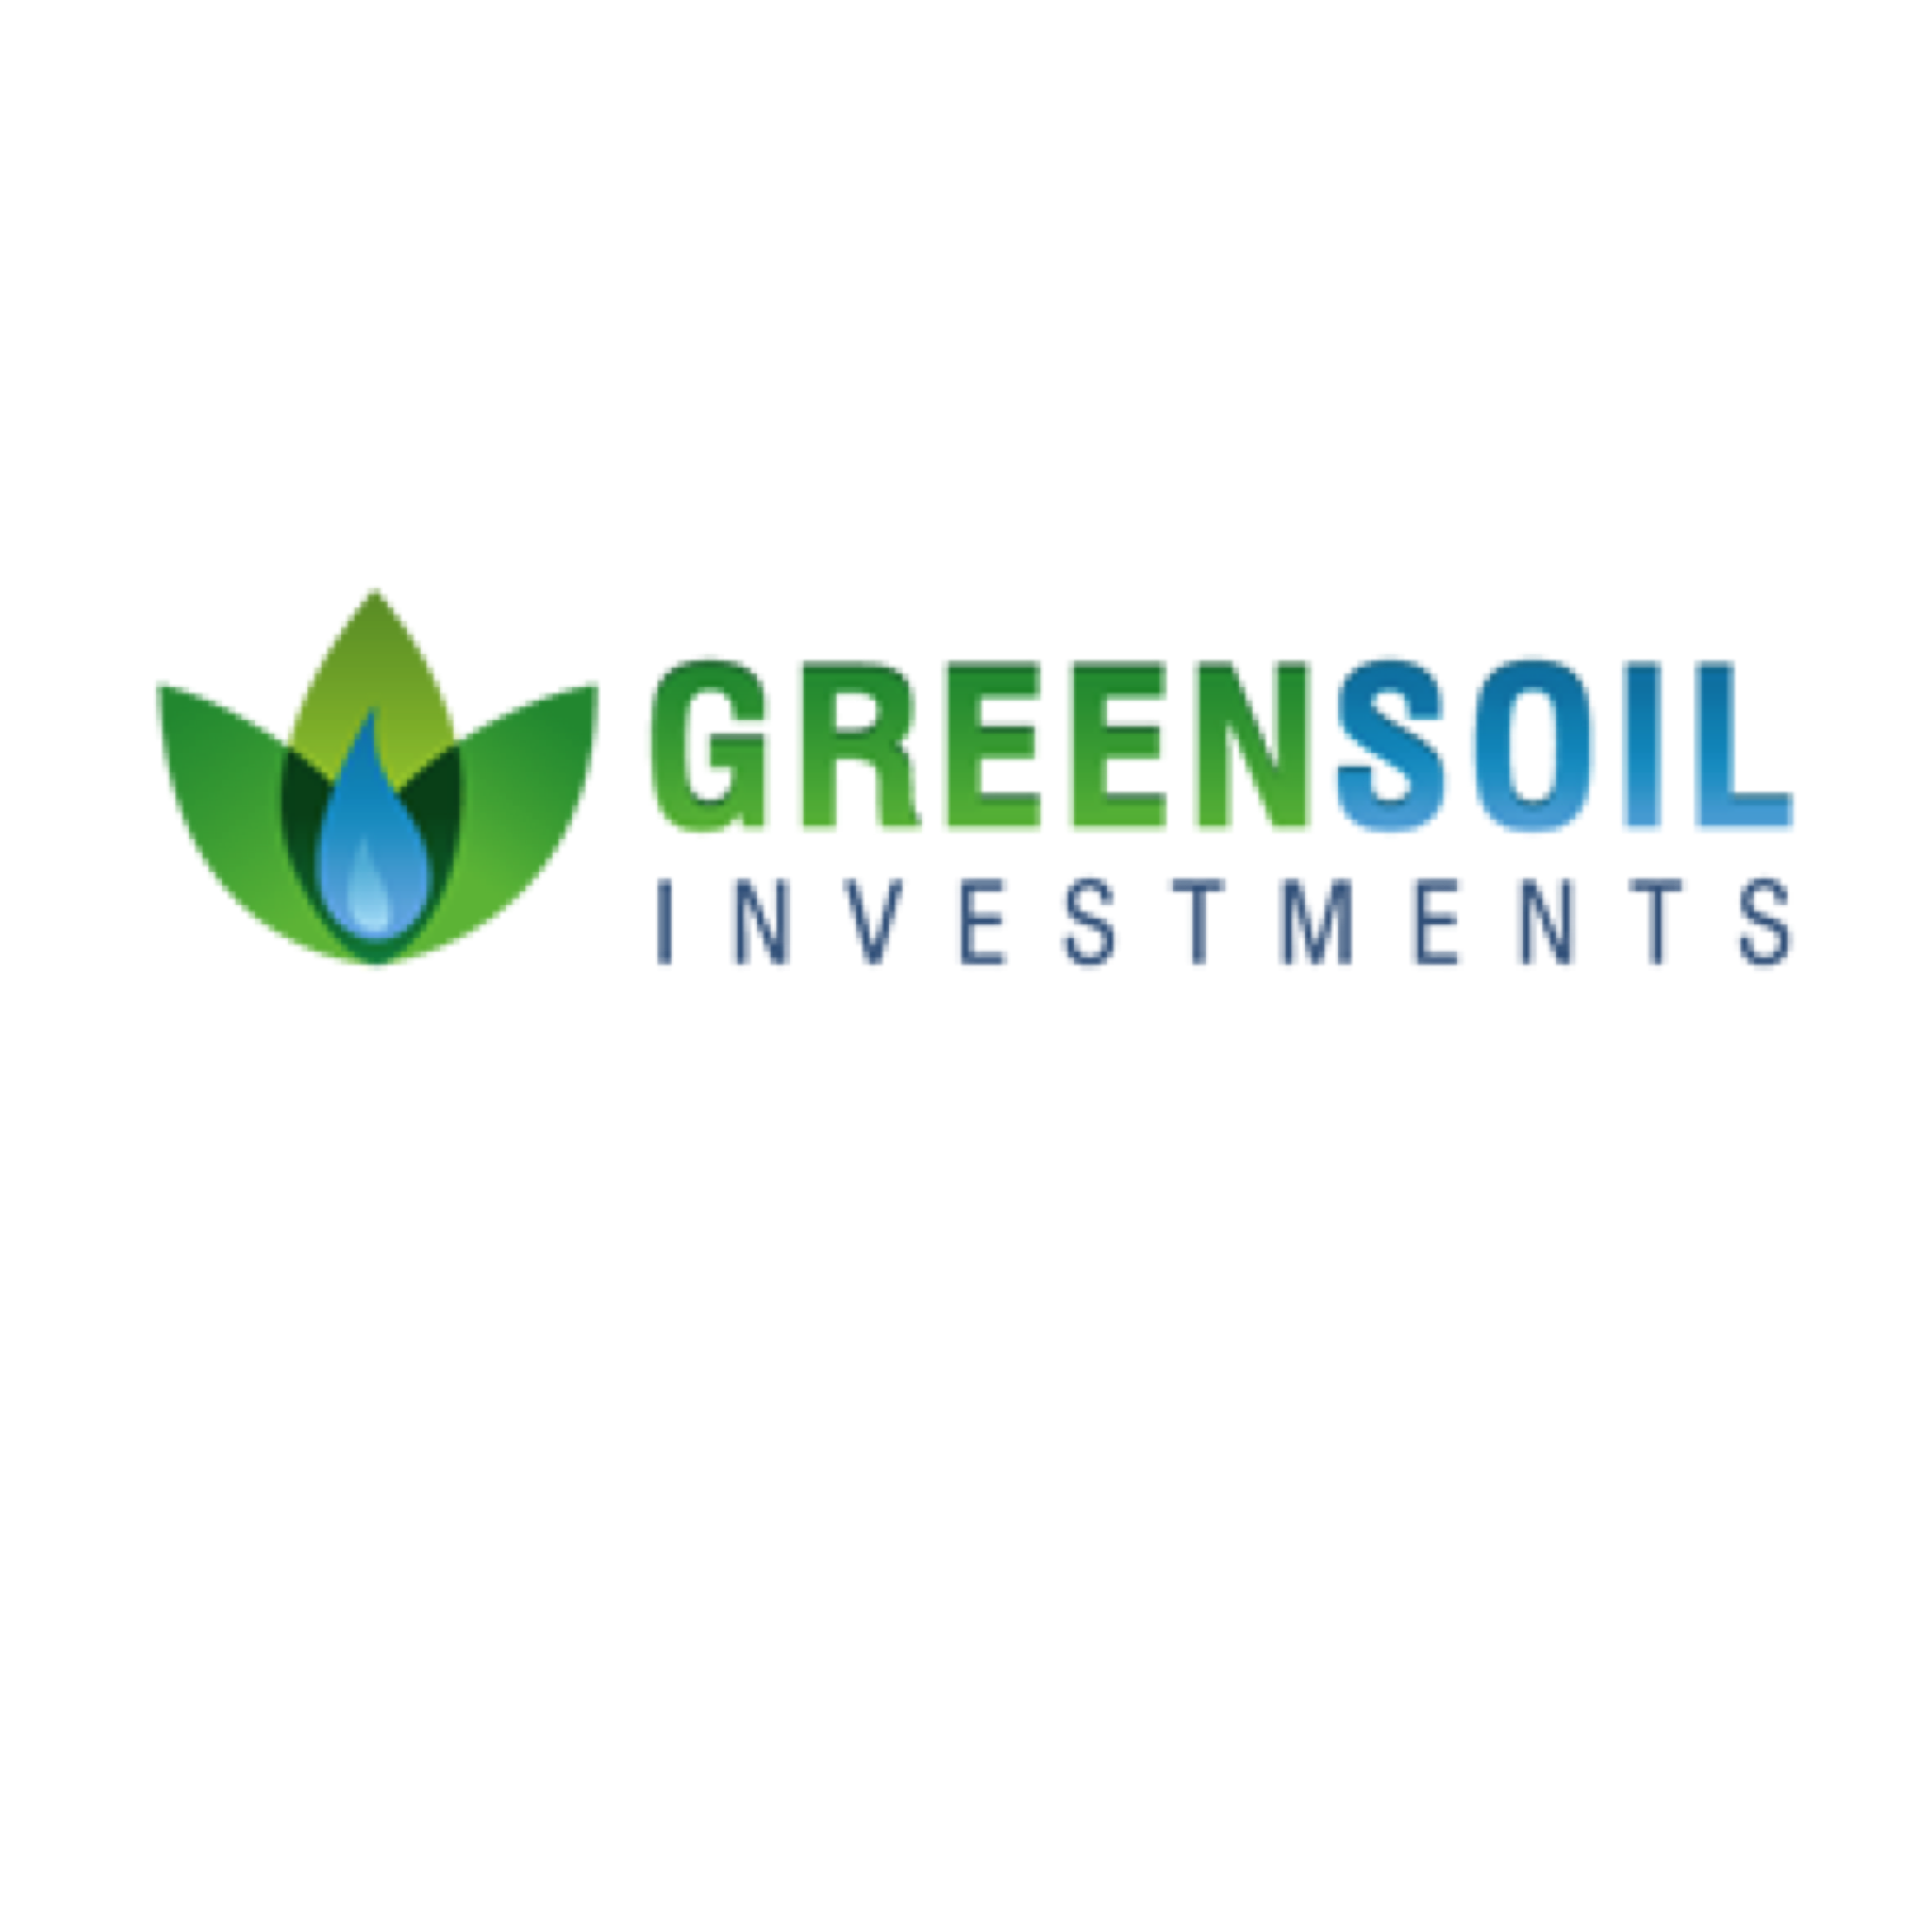 Greensoil Investments